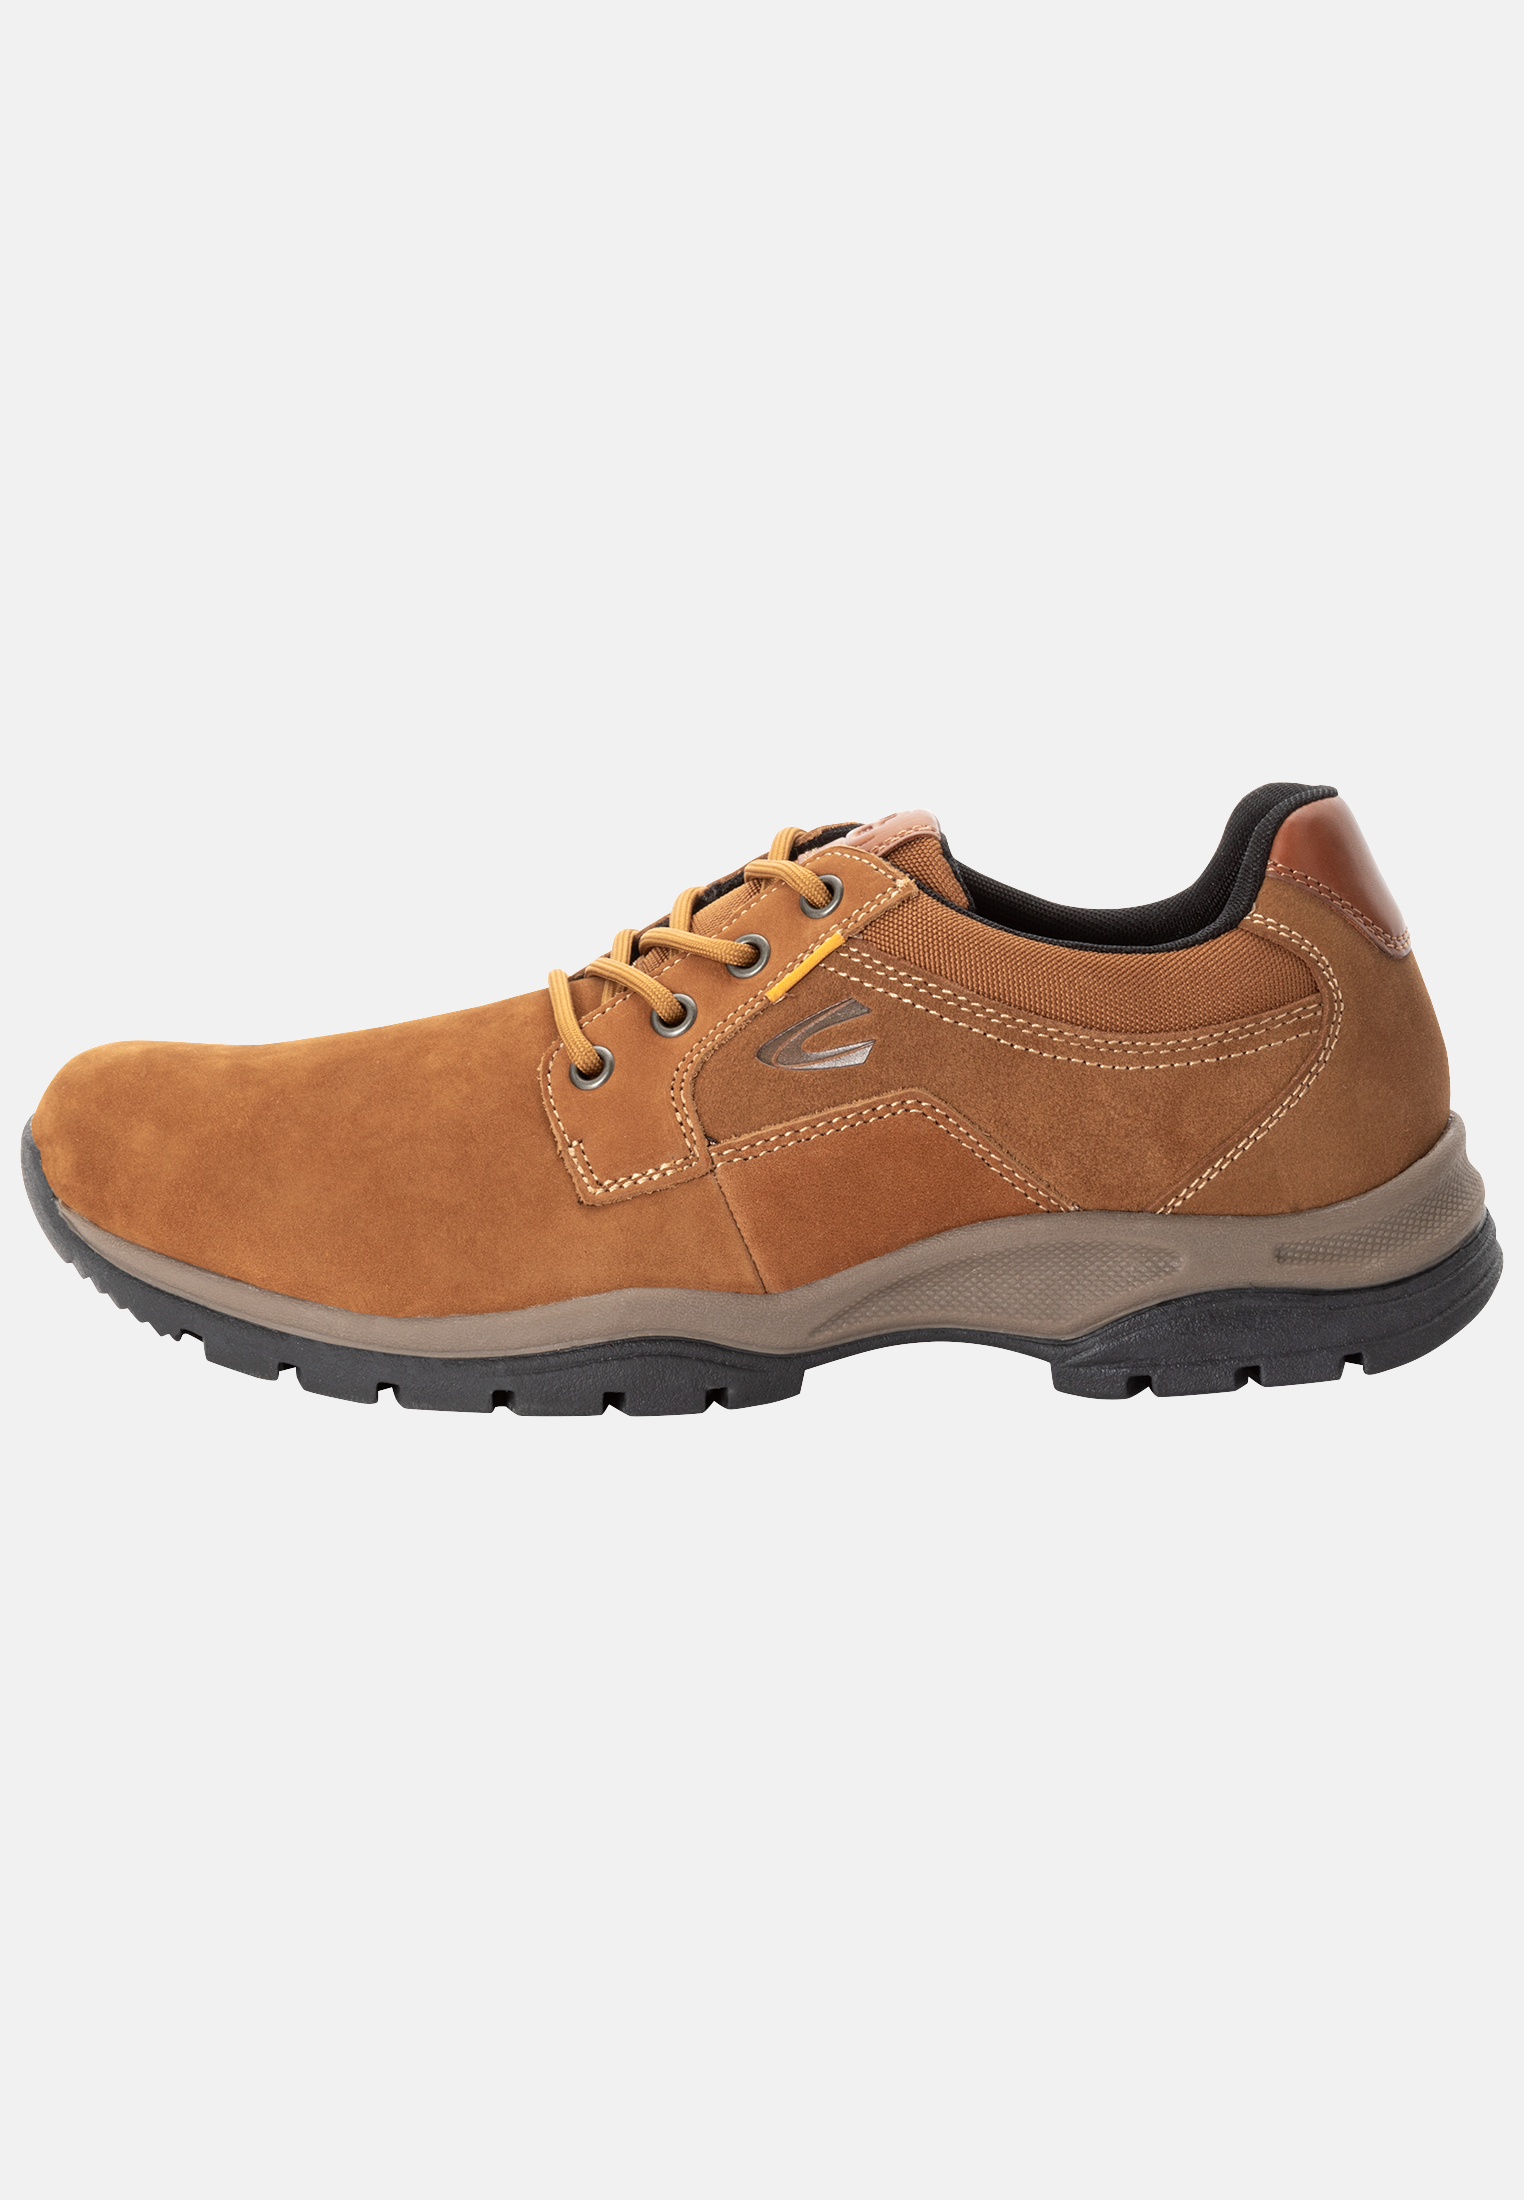 Camel Active Lace-up shoes from nubuck leather